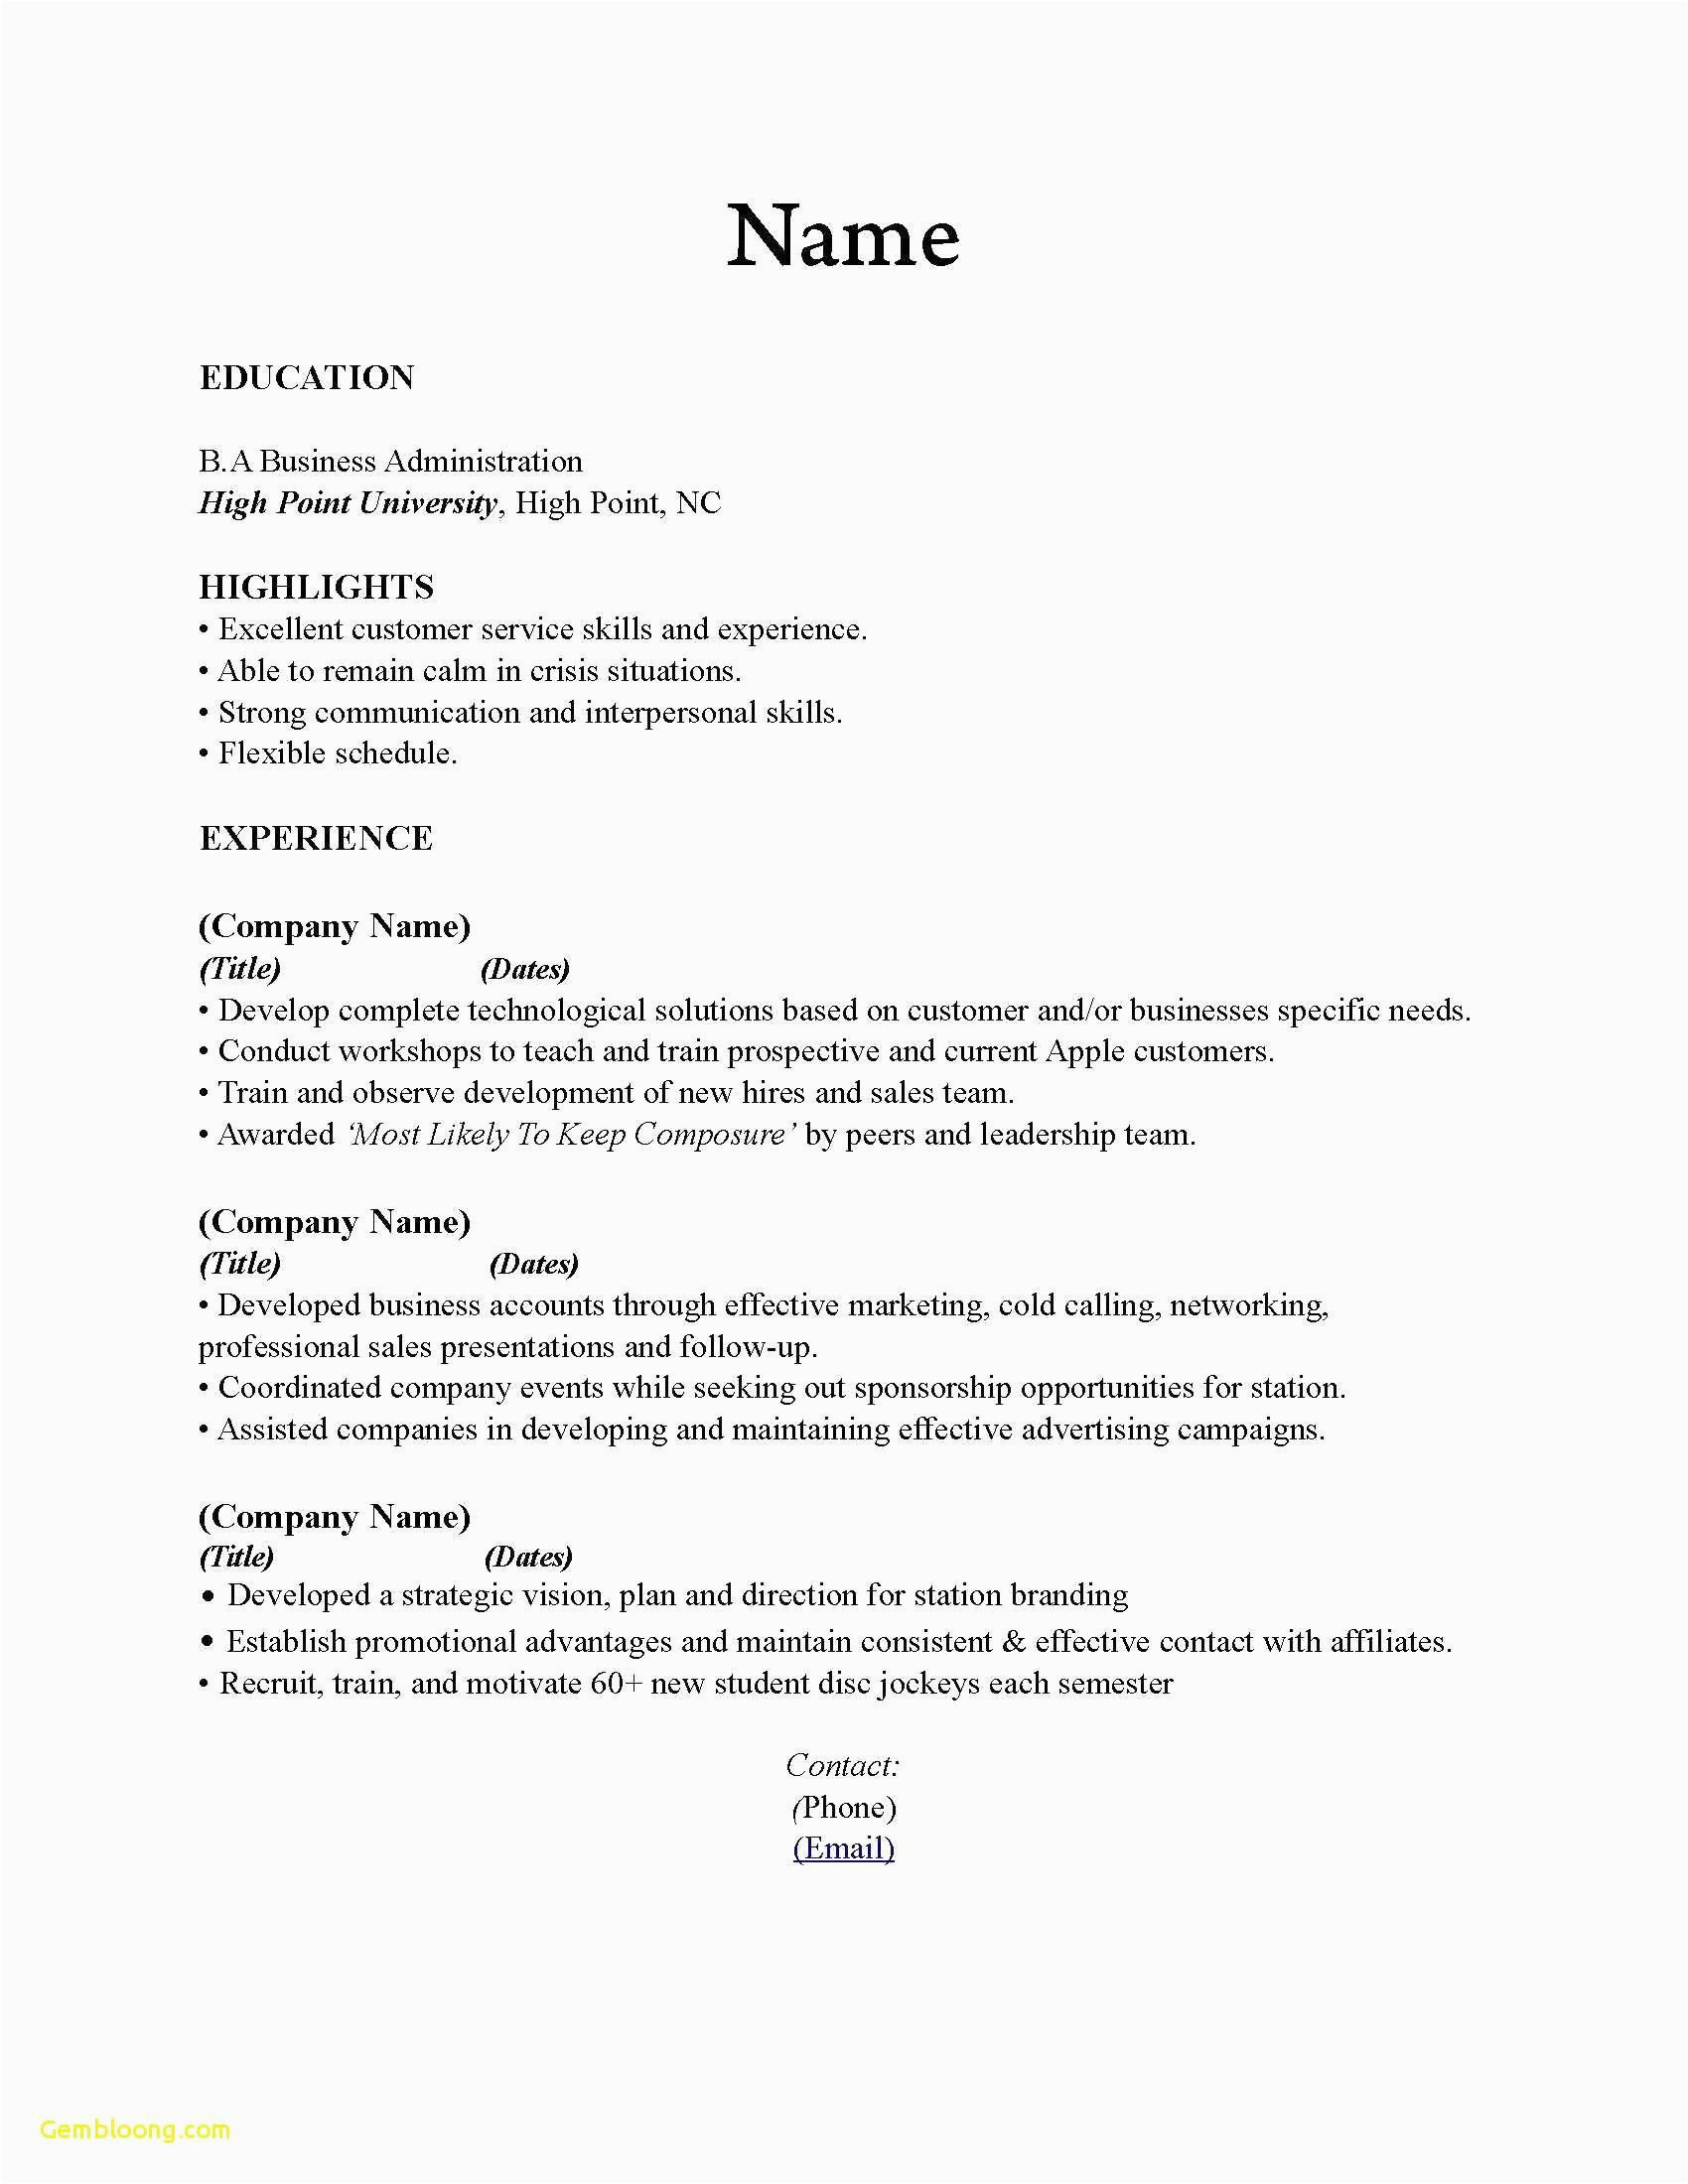 Cold Call Resume Cover Letter Samples 14 15 Cold Call Cover Letter Sample southbeachcafesf